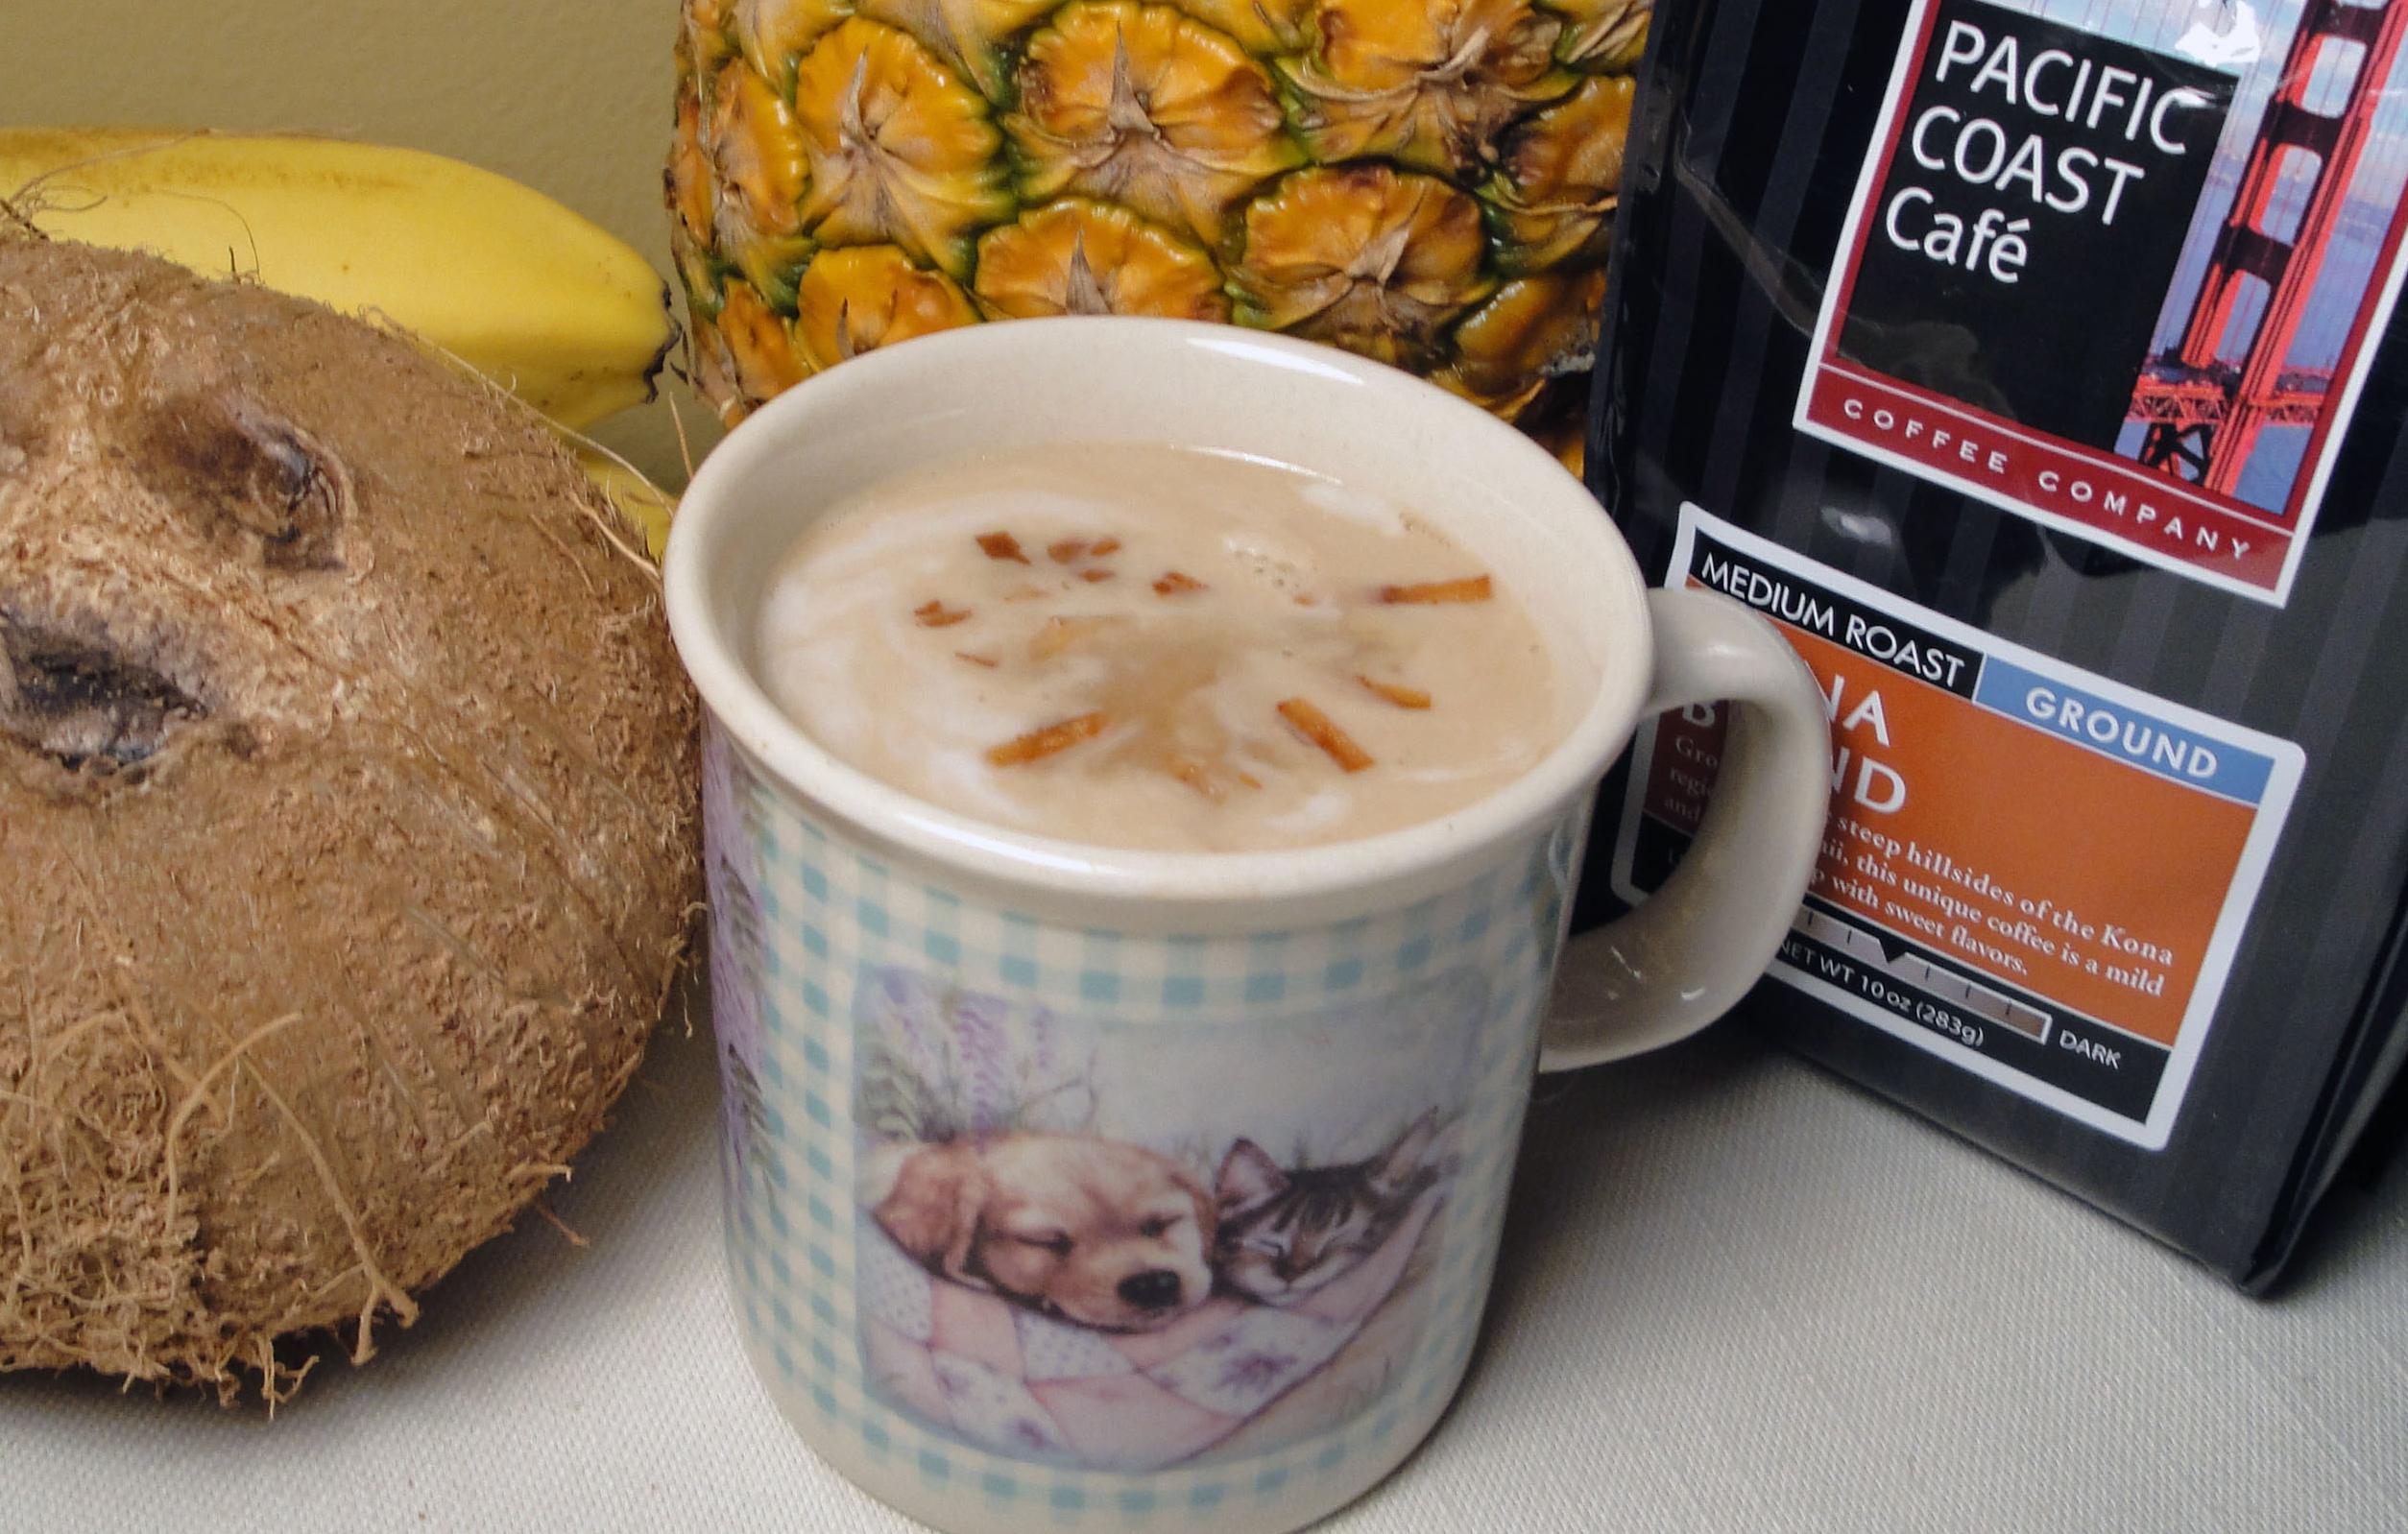  One sip of this coffee, and you'll feel like you're on vacation in Hawaii!